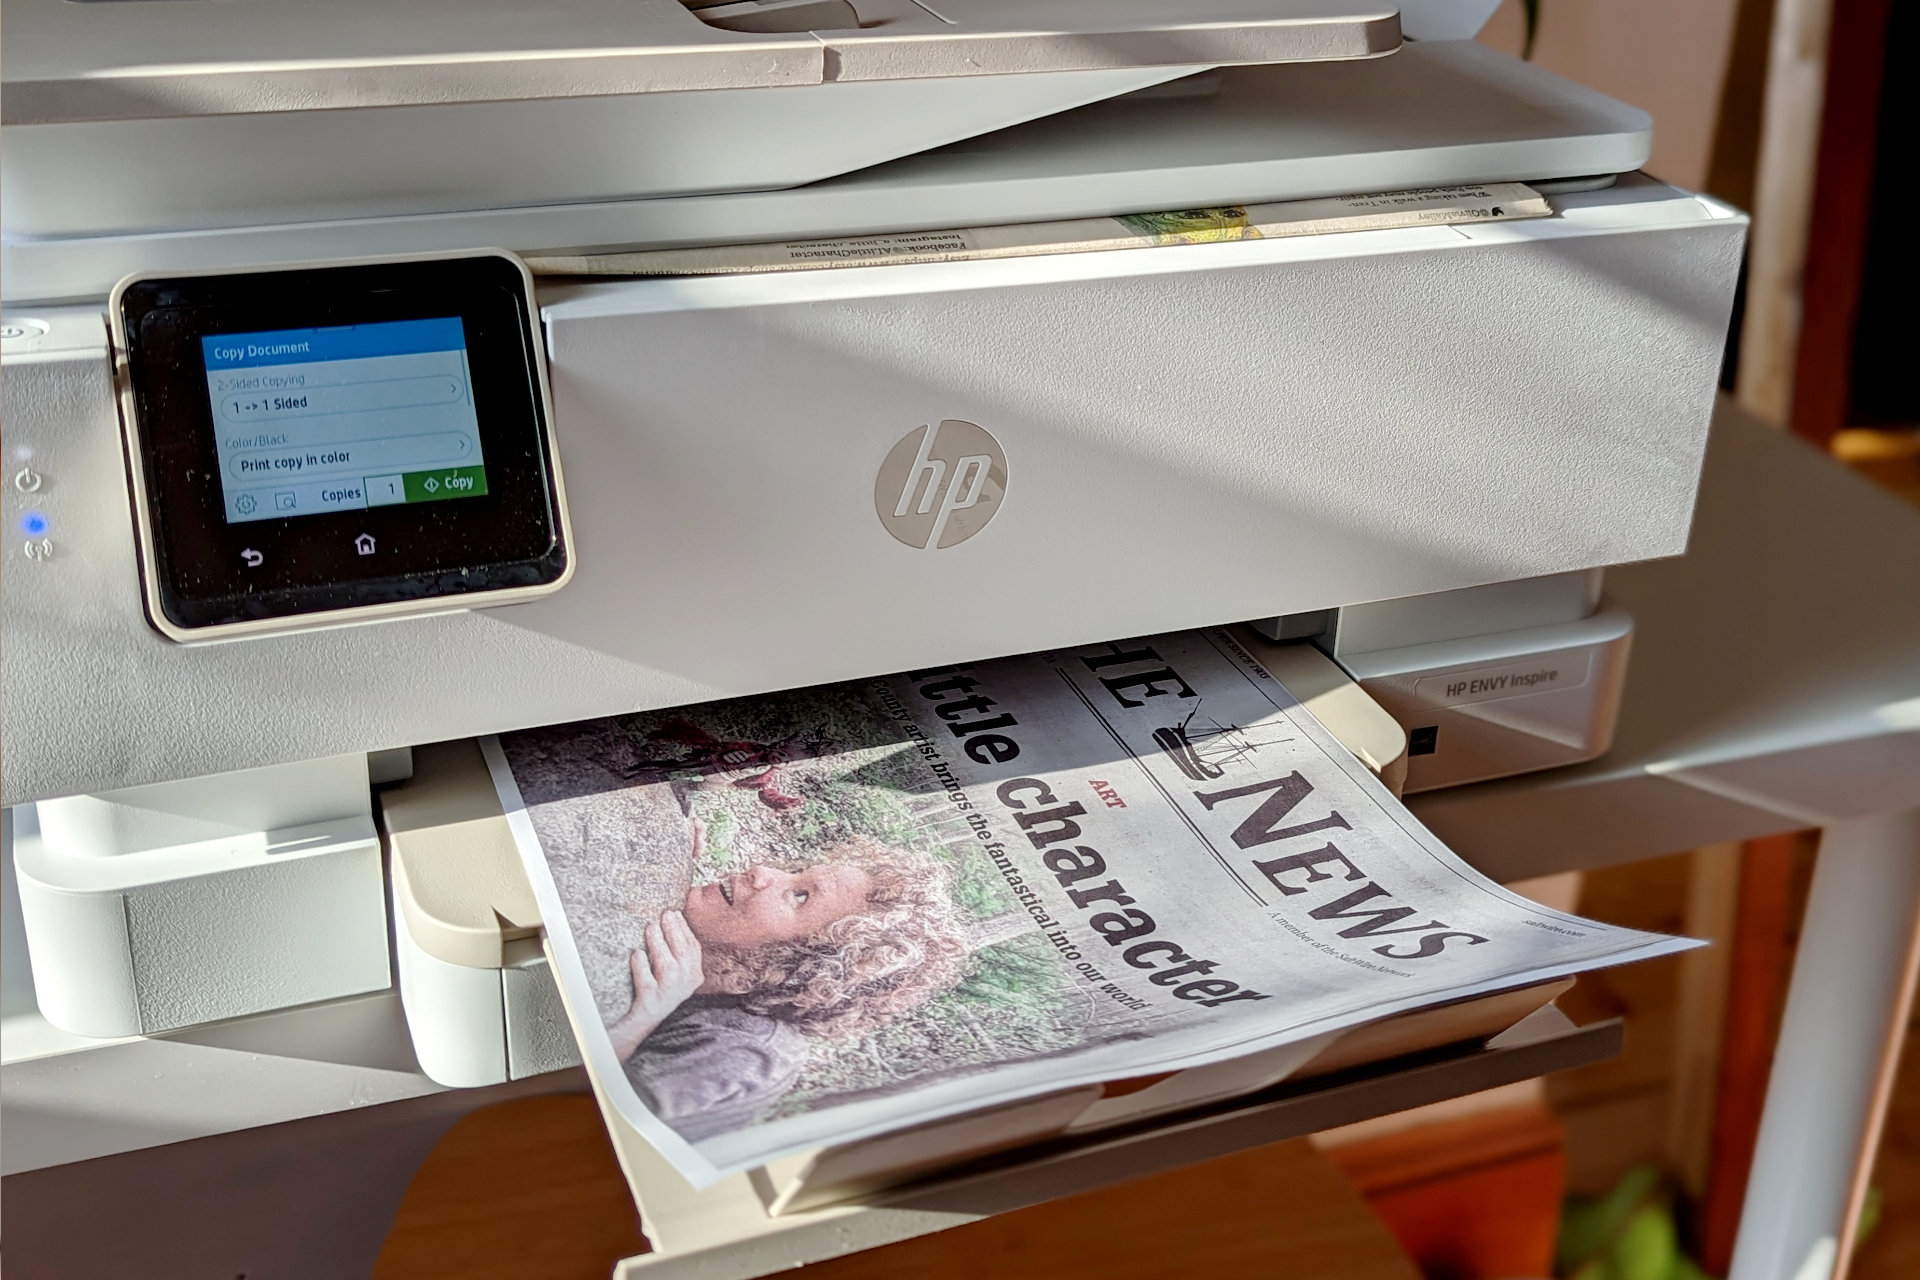 The HP Envy Inspire 7955e makes a copy of a newspaper's art section.